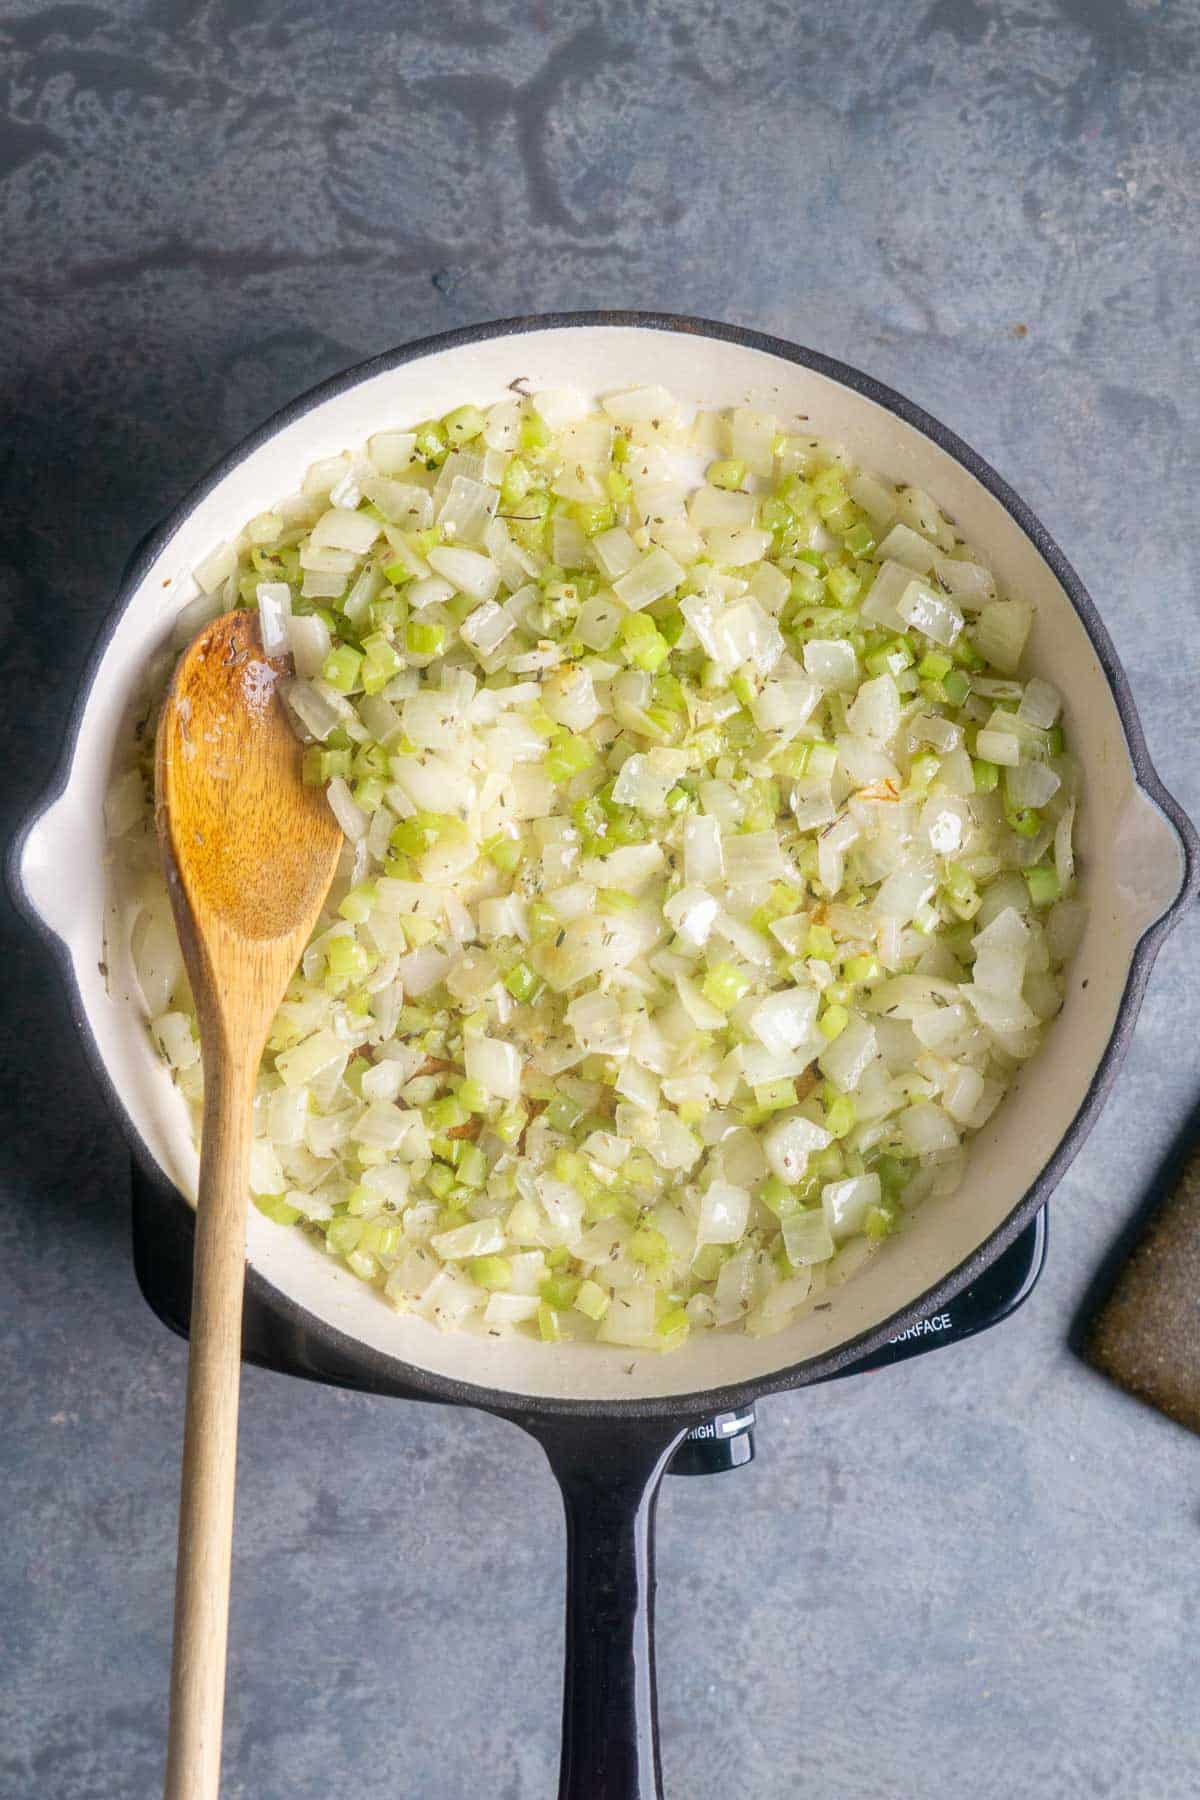 wooden spoon stirs celery and onions sauteing in iron skillet